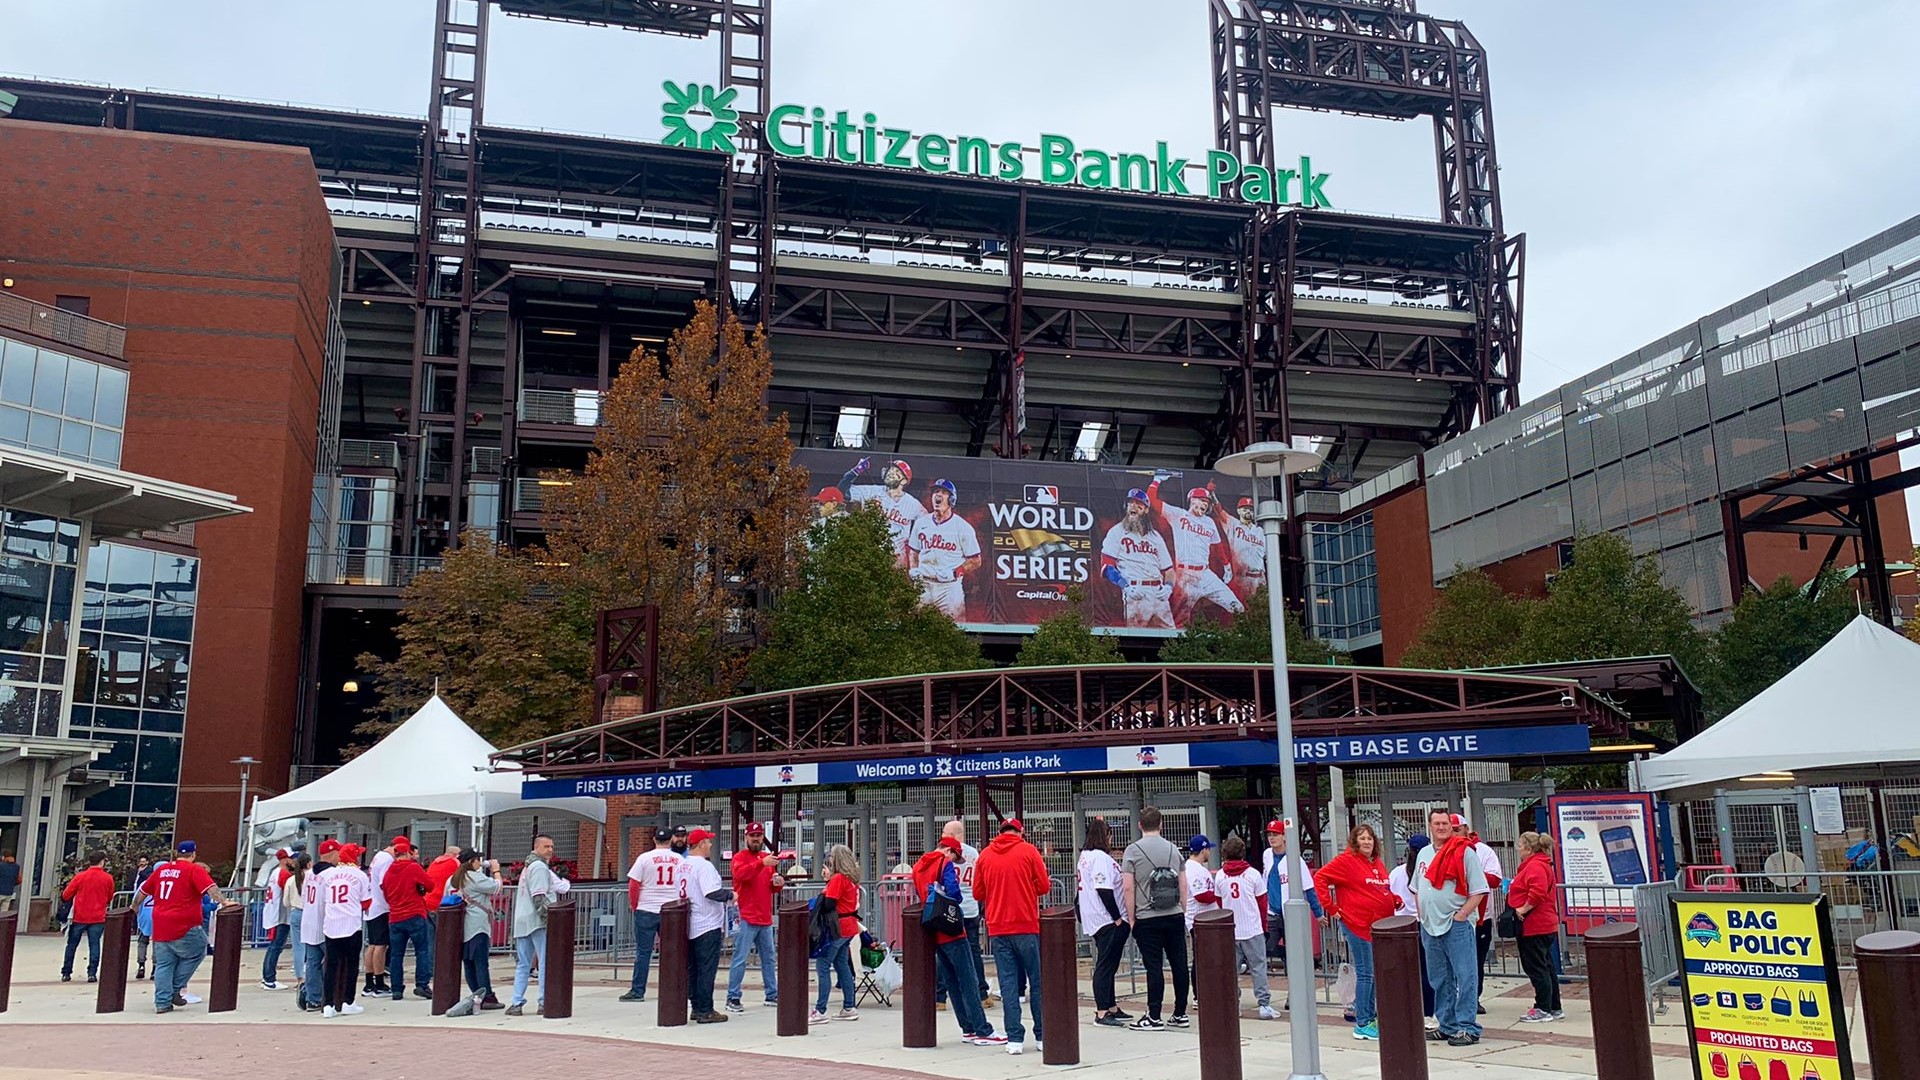 After a rainout on Monday, the World Series is set to resume of Tuesday with the first of three straight games at Citizens Bank Park.